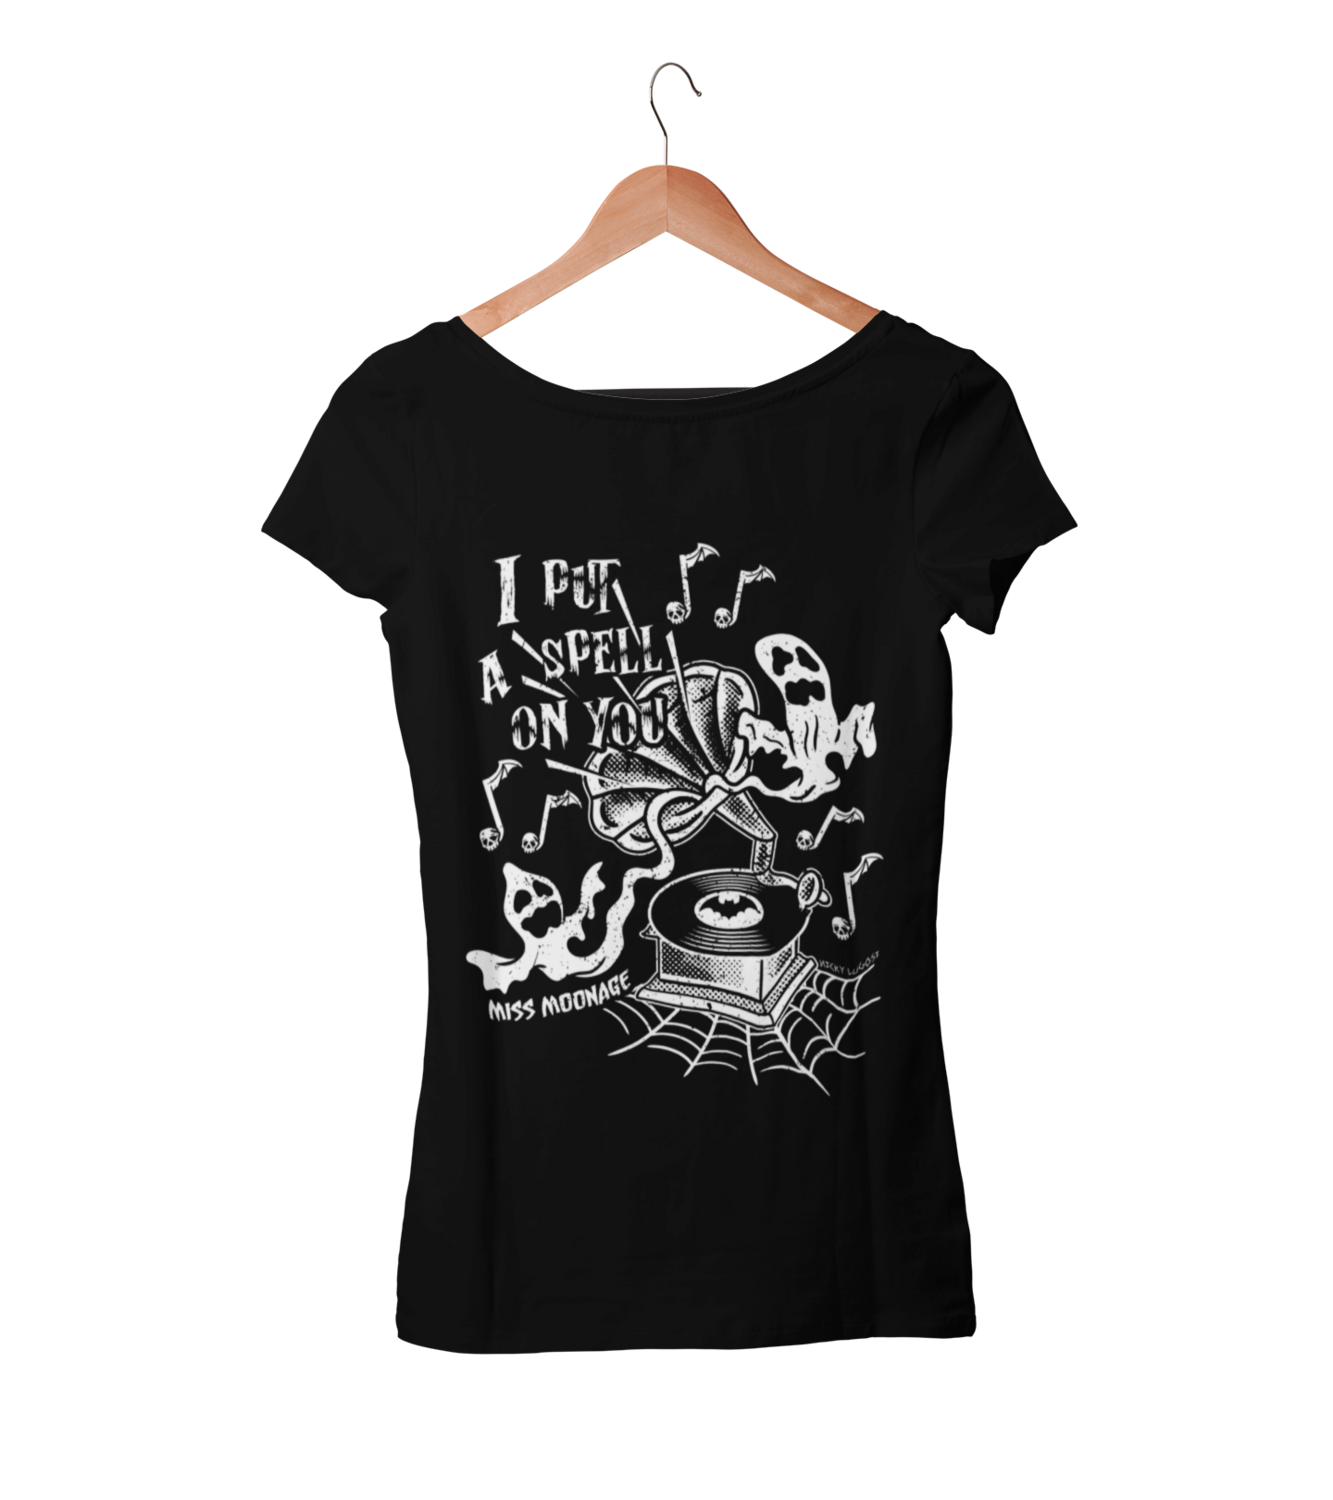 I PUT SPELL ON YOU by MISS MOONAGE tshirt for WOMEN